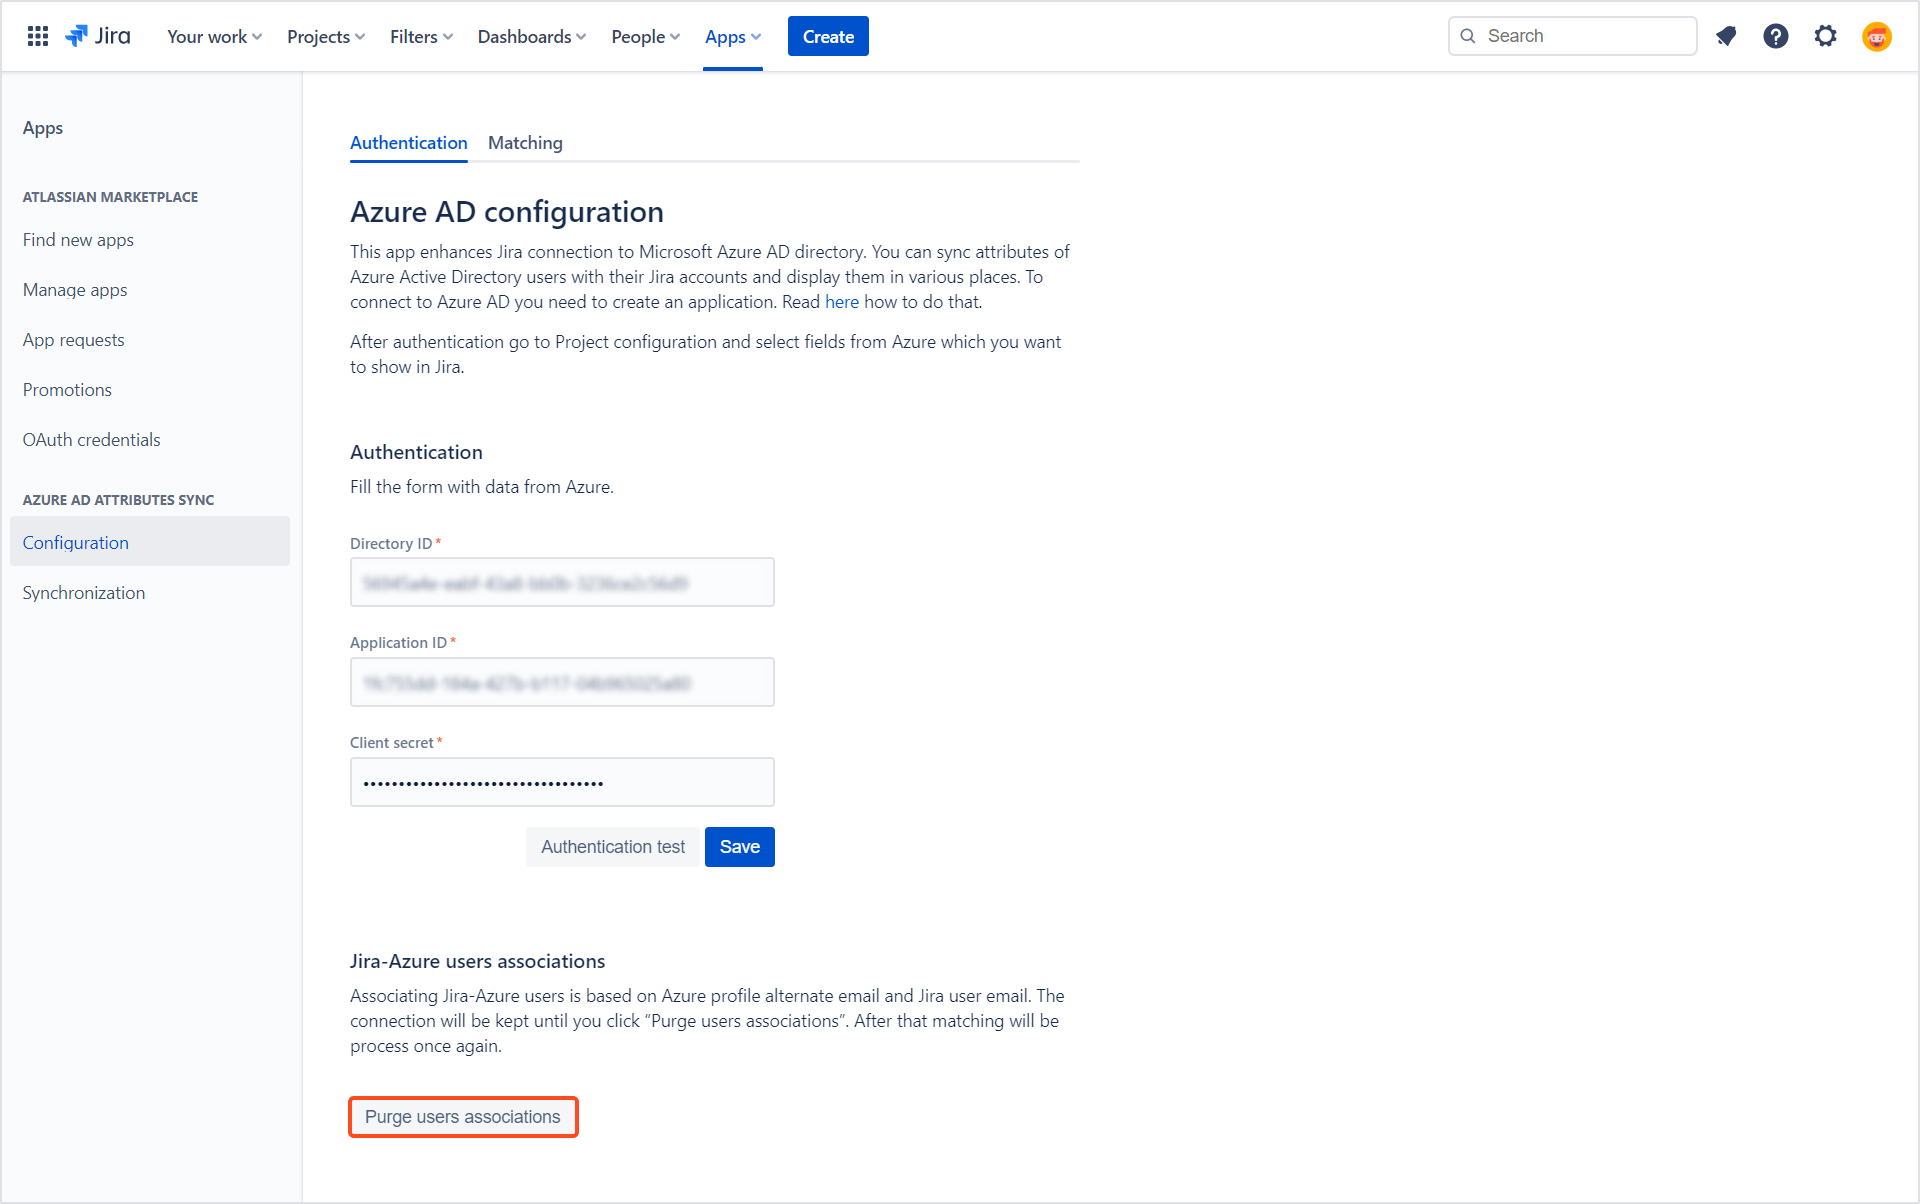 Jira Active Directory integration with Azure AD Attributes - Jira connecting to an LDAP to synchronize user accounts